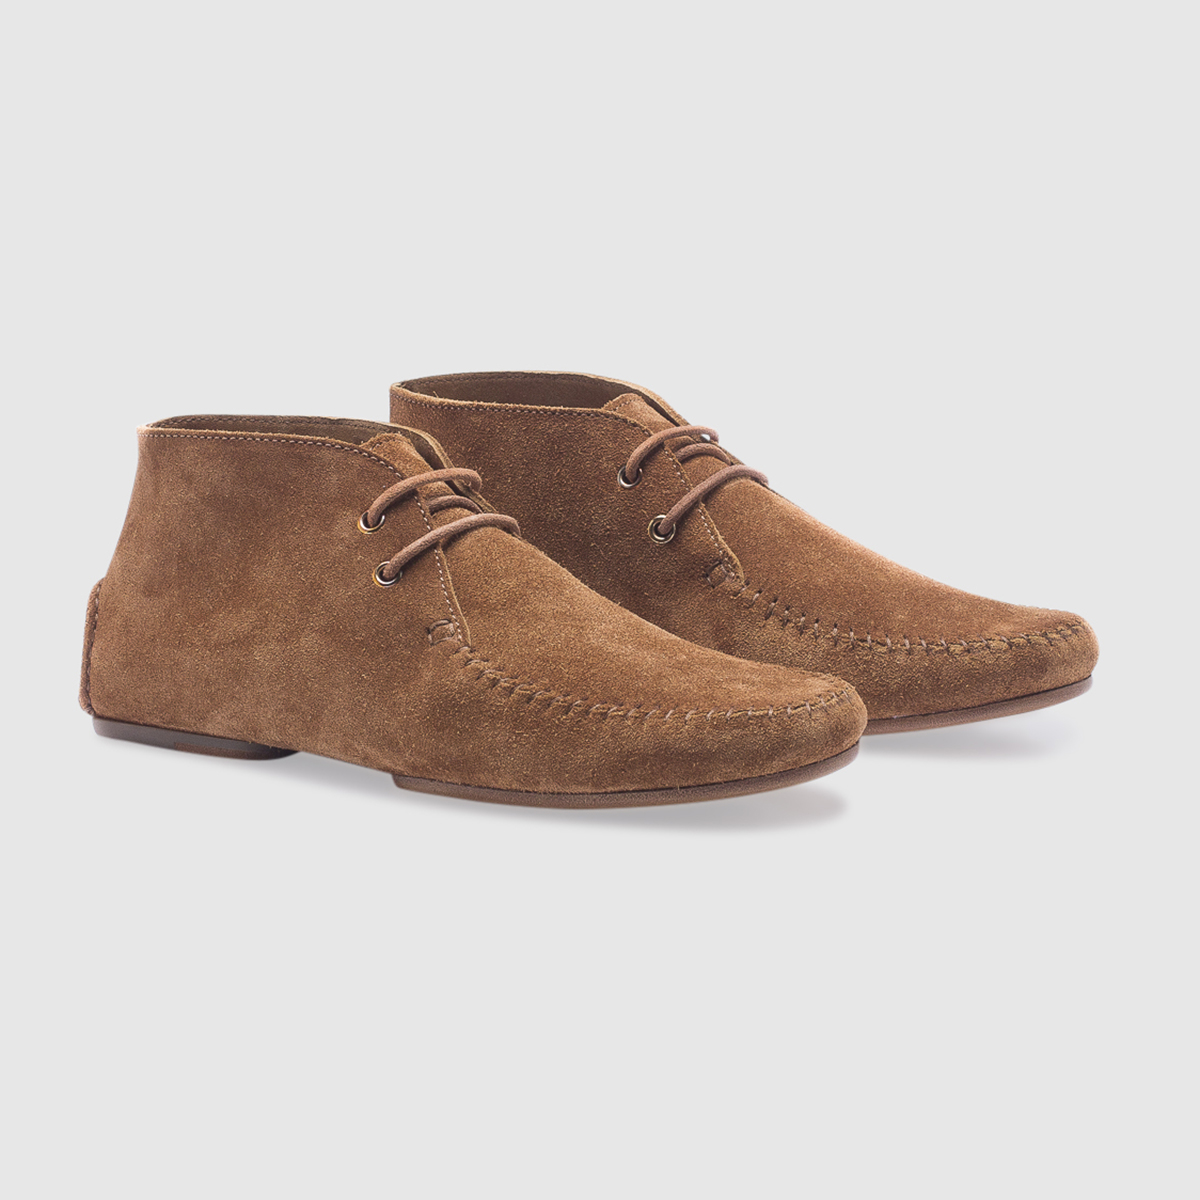 Lace-up unlined desert boot in suede – umber Calò on sale 2022 2